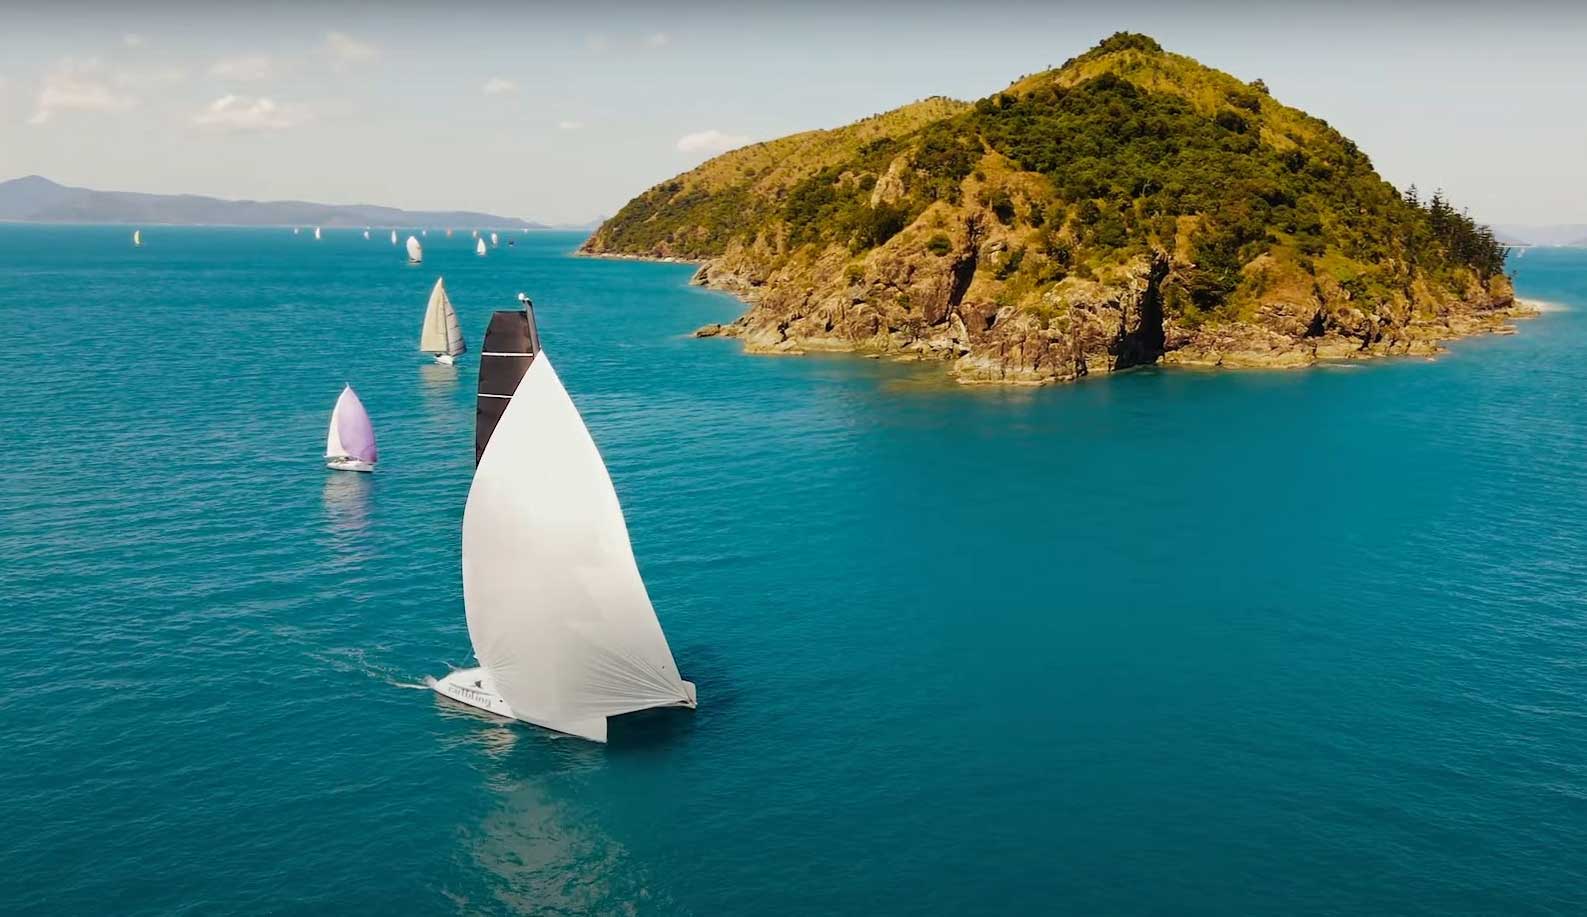 yachts racing around an island offshore of Airlie Beach